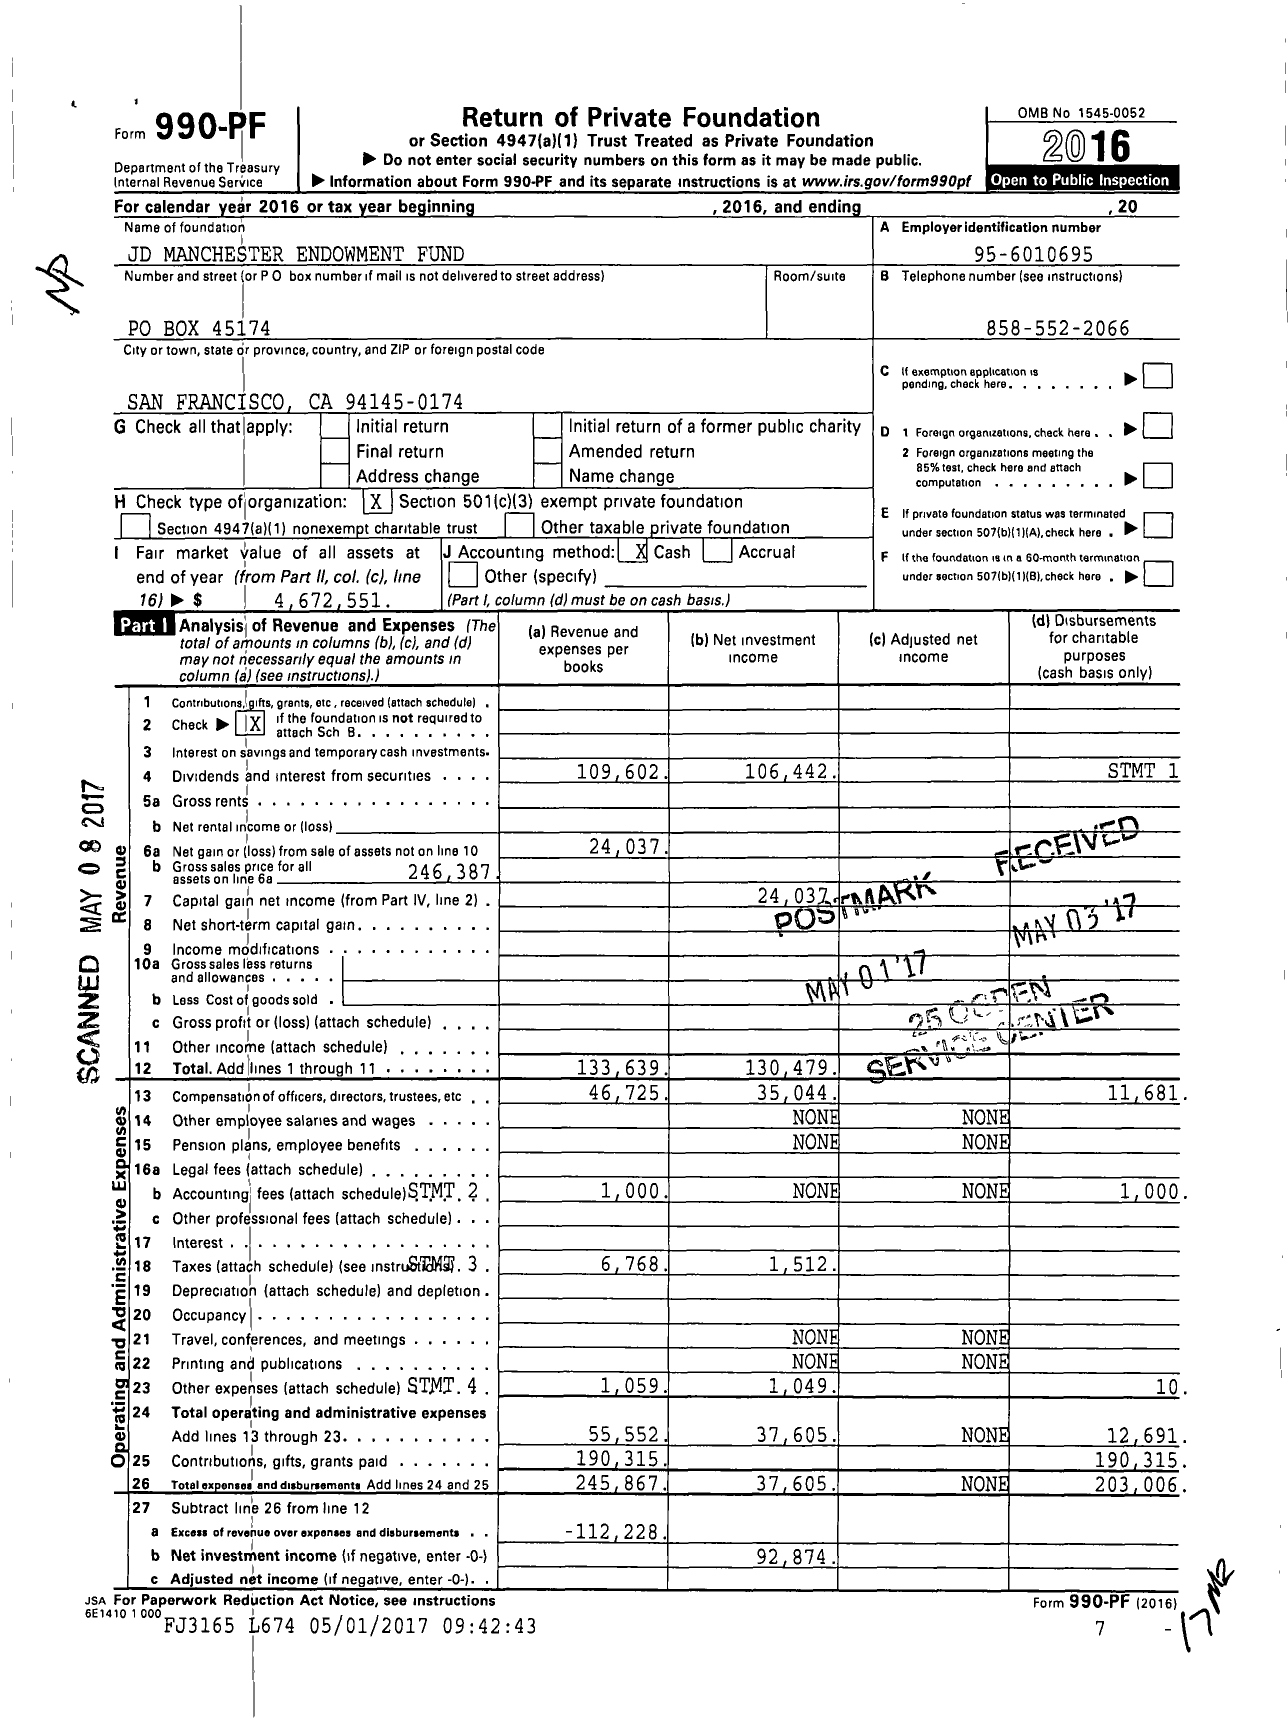 Image of first page of 2016 Form 990PF for JD Manchester Endowment Fund